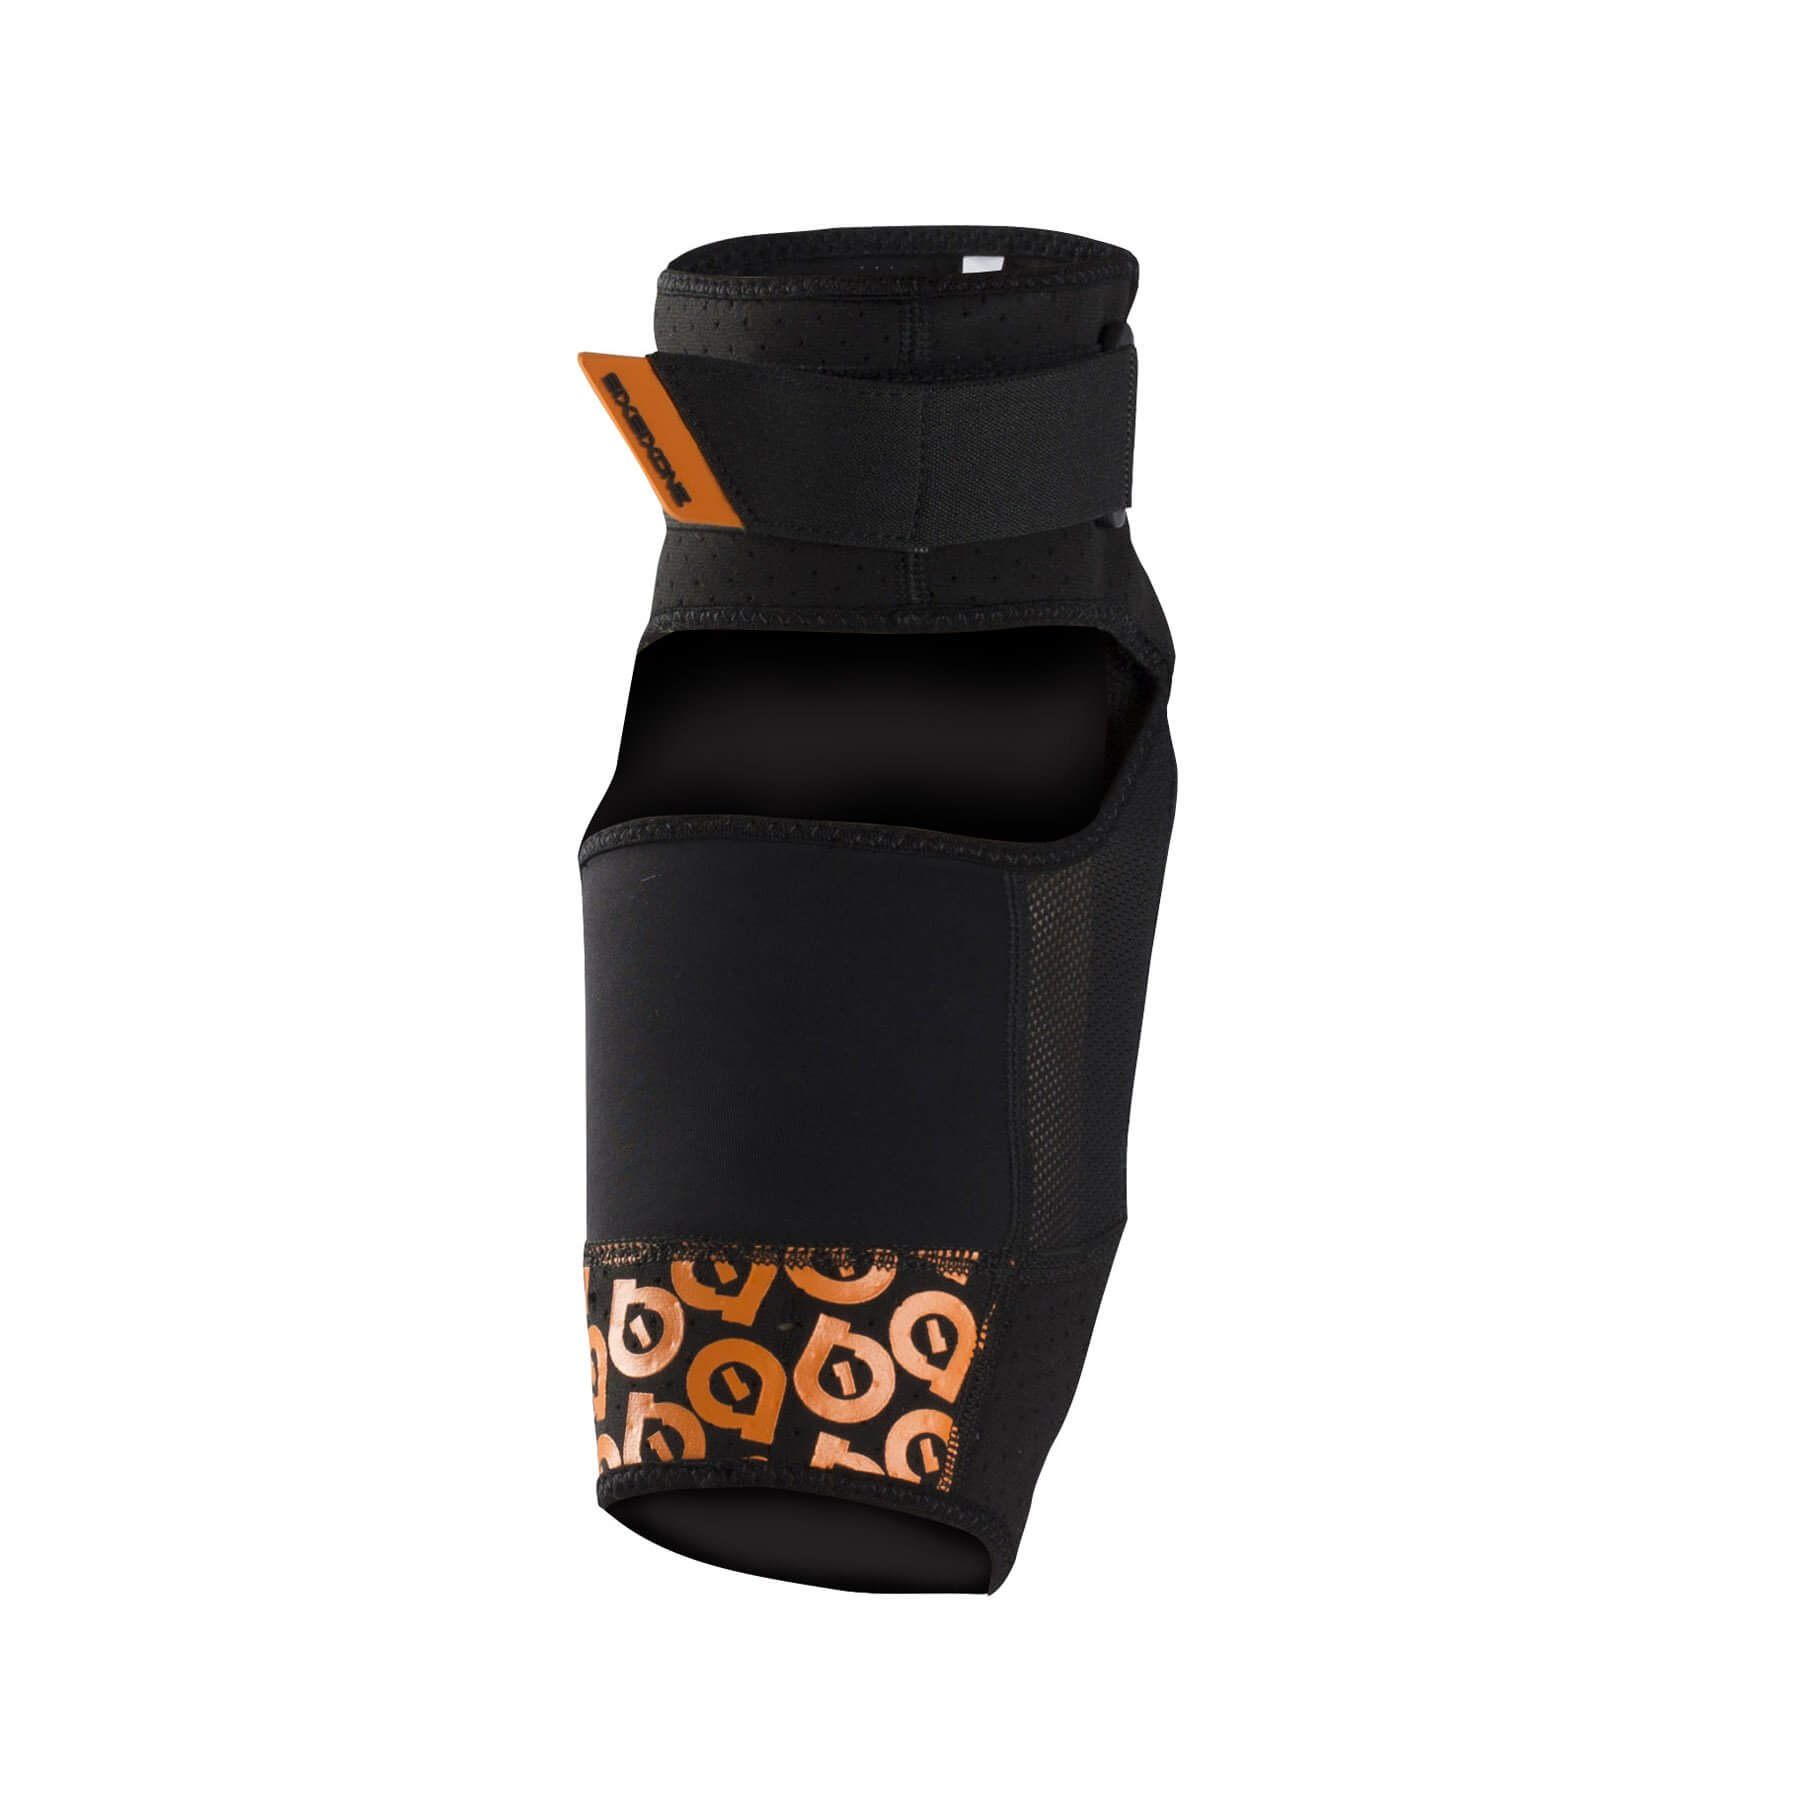 PROTECTOR CODO SIX SIX ONE COMP AM ELBOW PAD BLACK